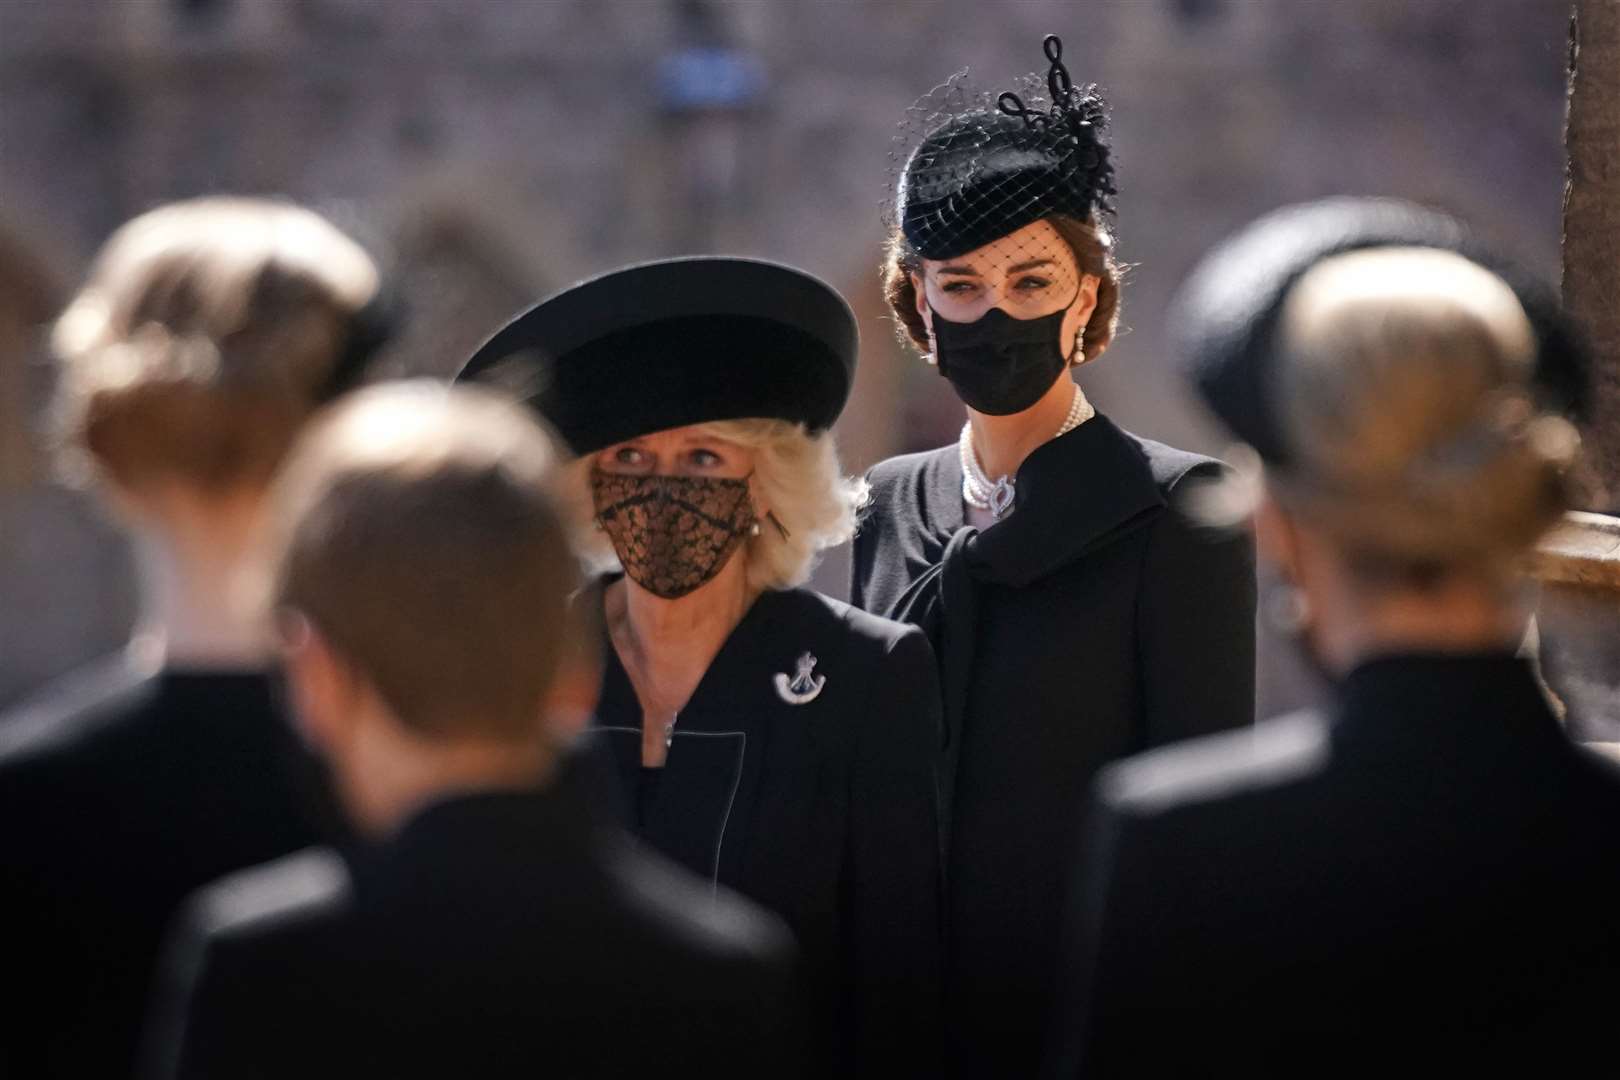 The Duchess of Cornwall and the Duchess of Cambridge in their face coverings (Victoria Jones/PA)